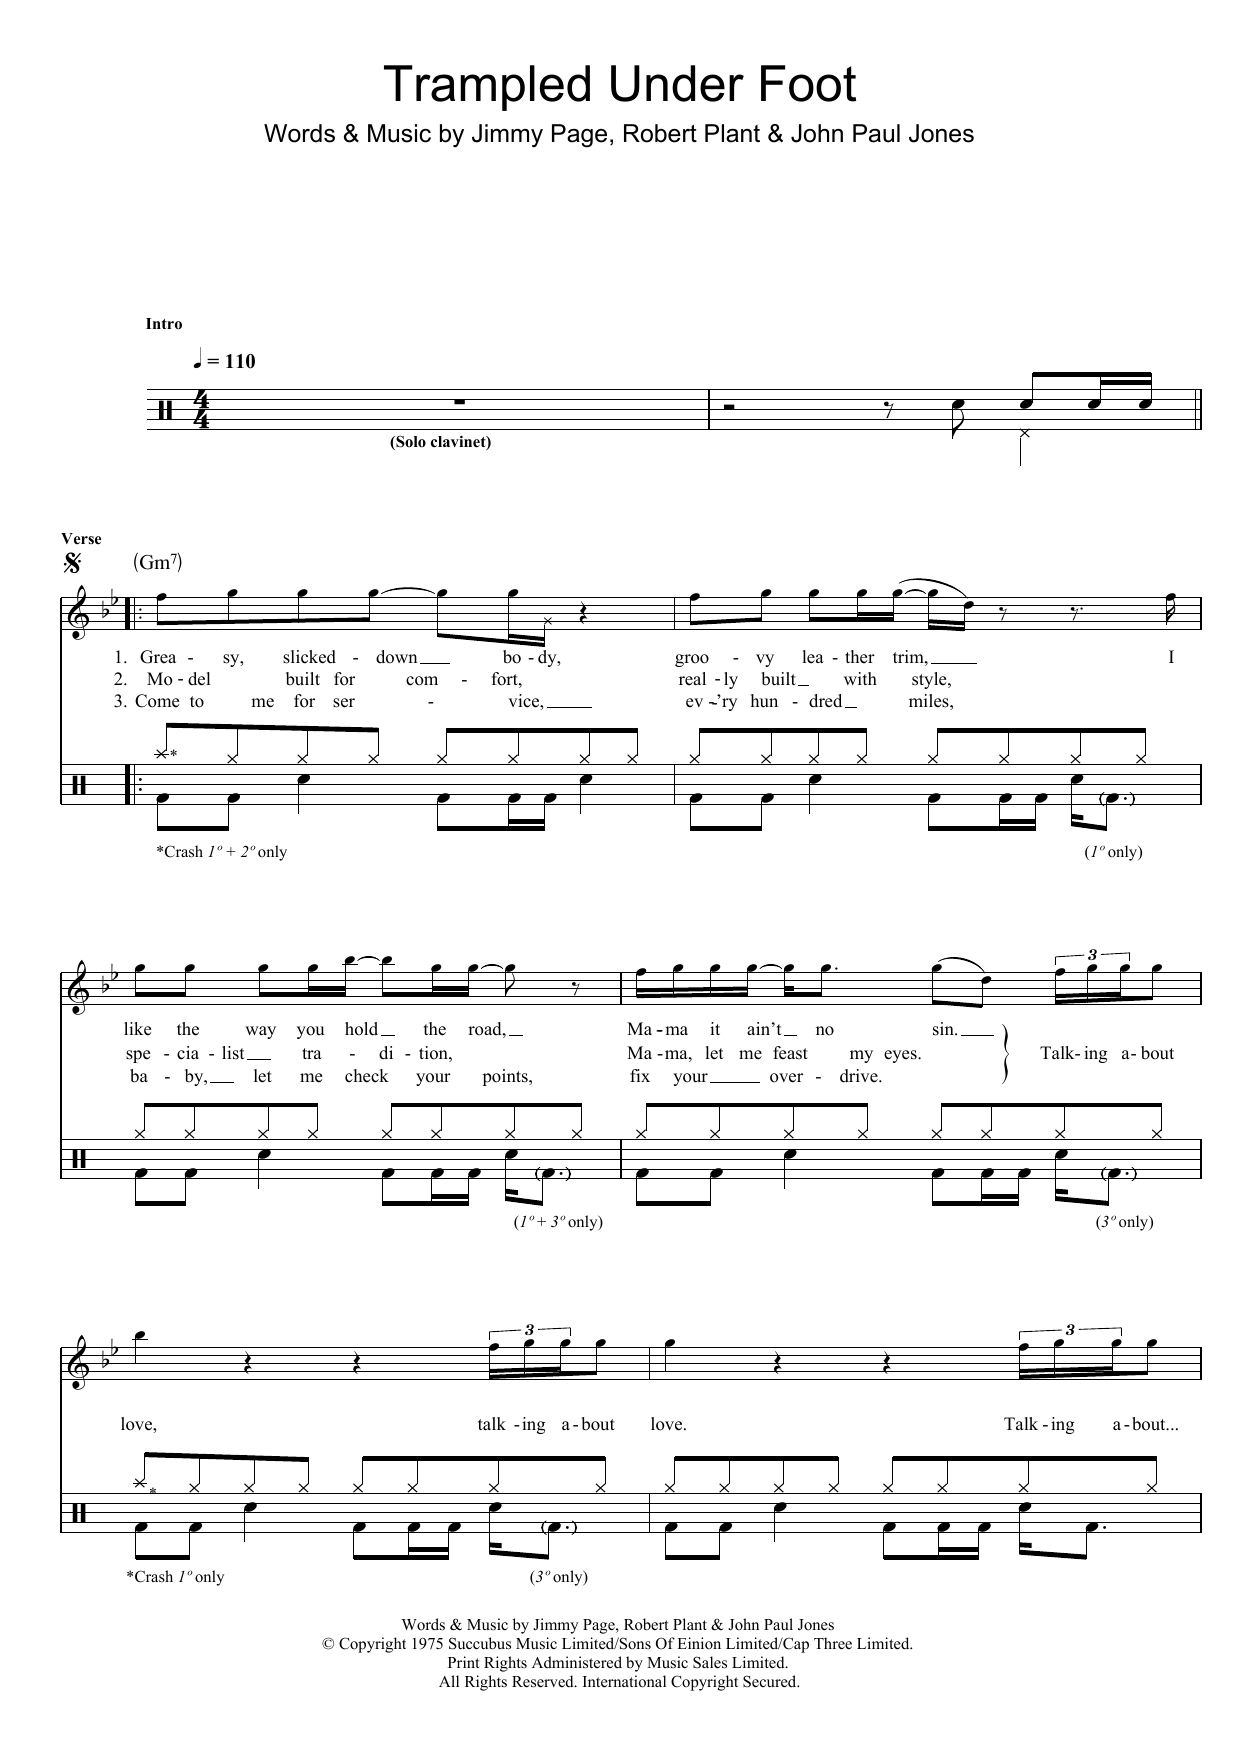 Download Led Zeppelin Trampled Underfoot Sheet Music